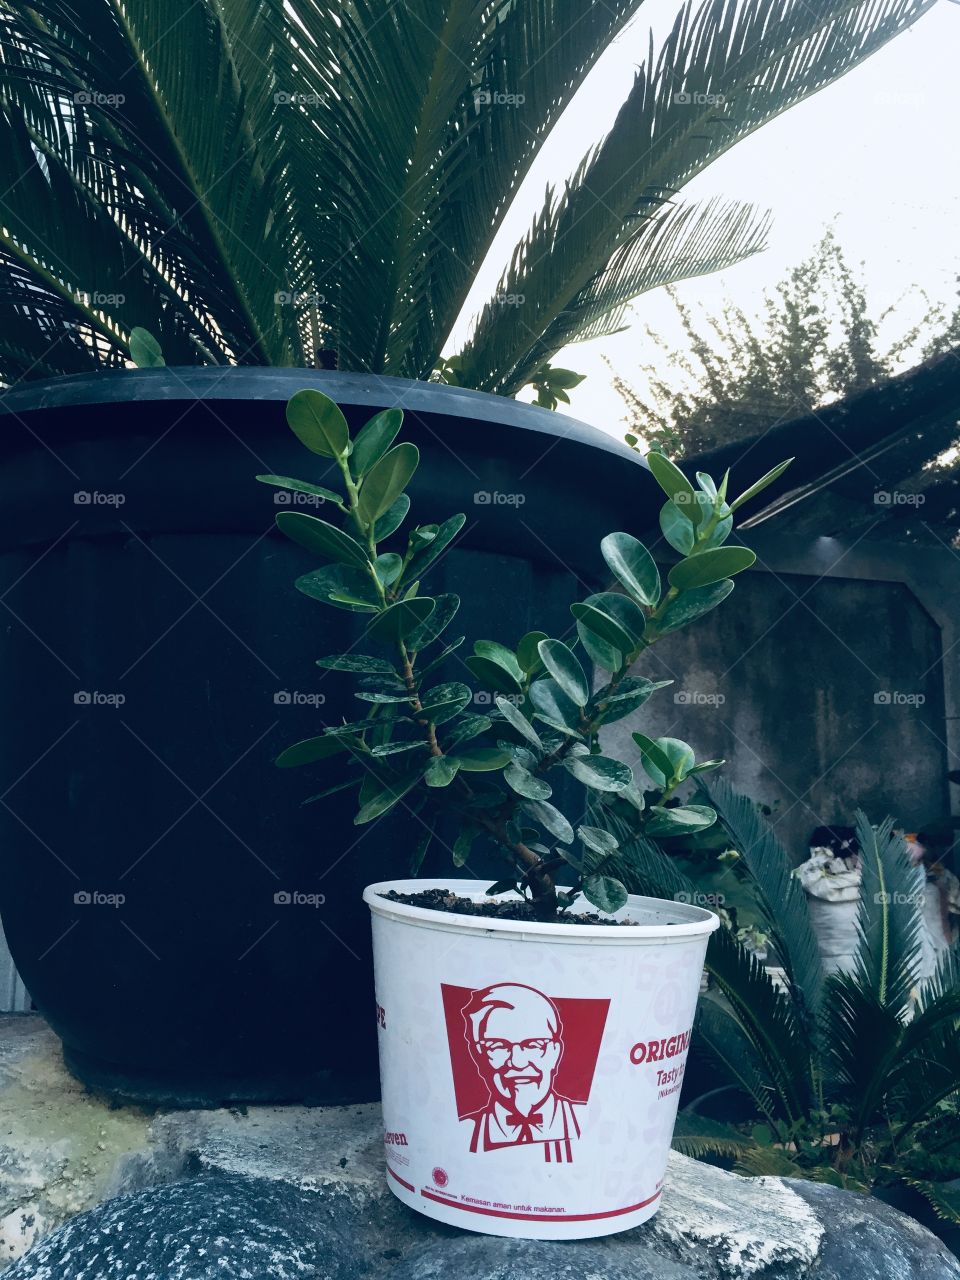 flowerpot using a used container from KFC